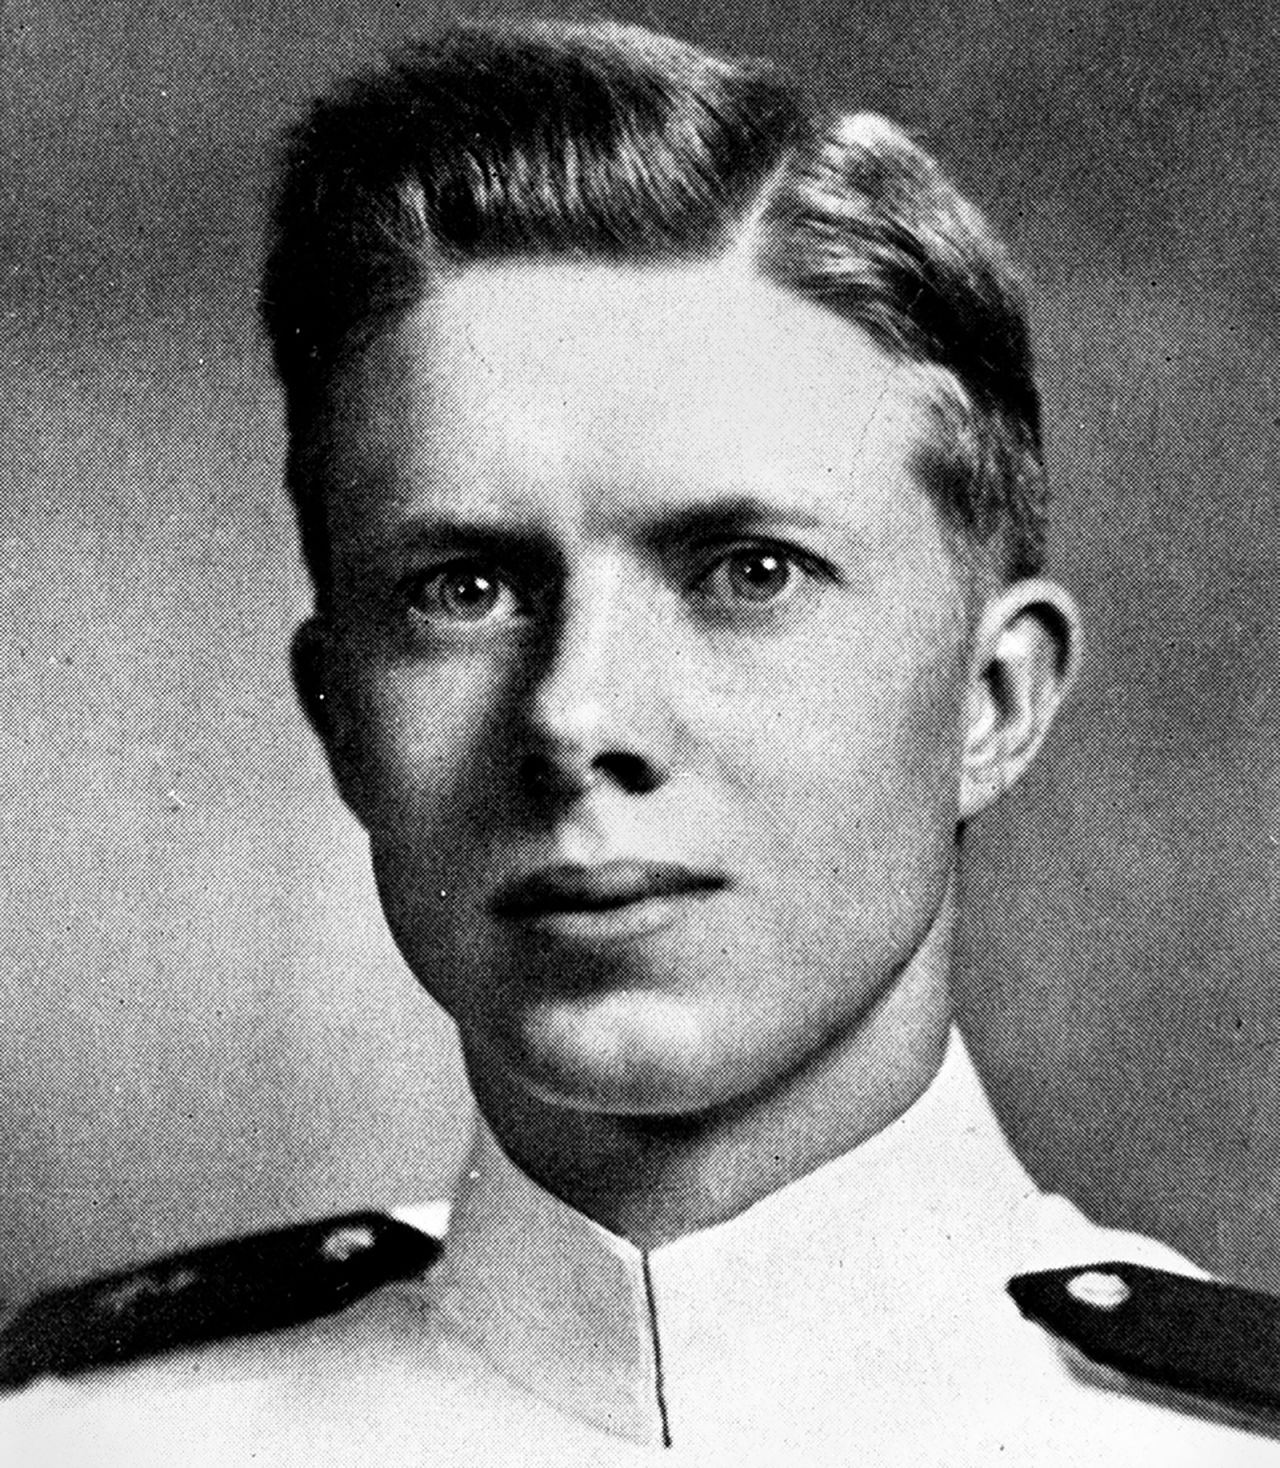 Carter graduated from the US Naval Academy on June 5, 1946, after completing the accelerated wartime program.